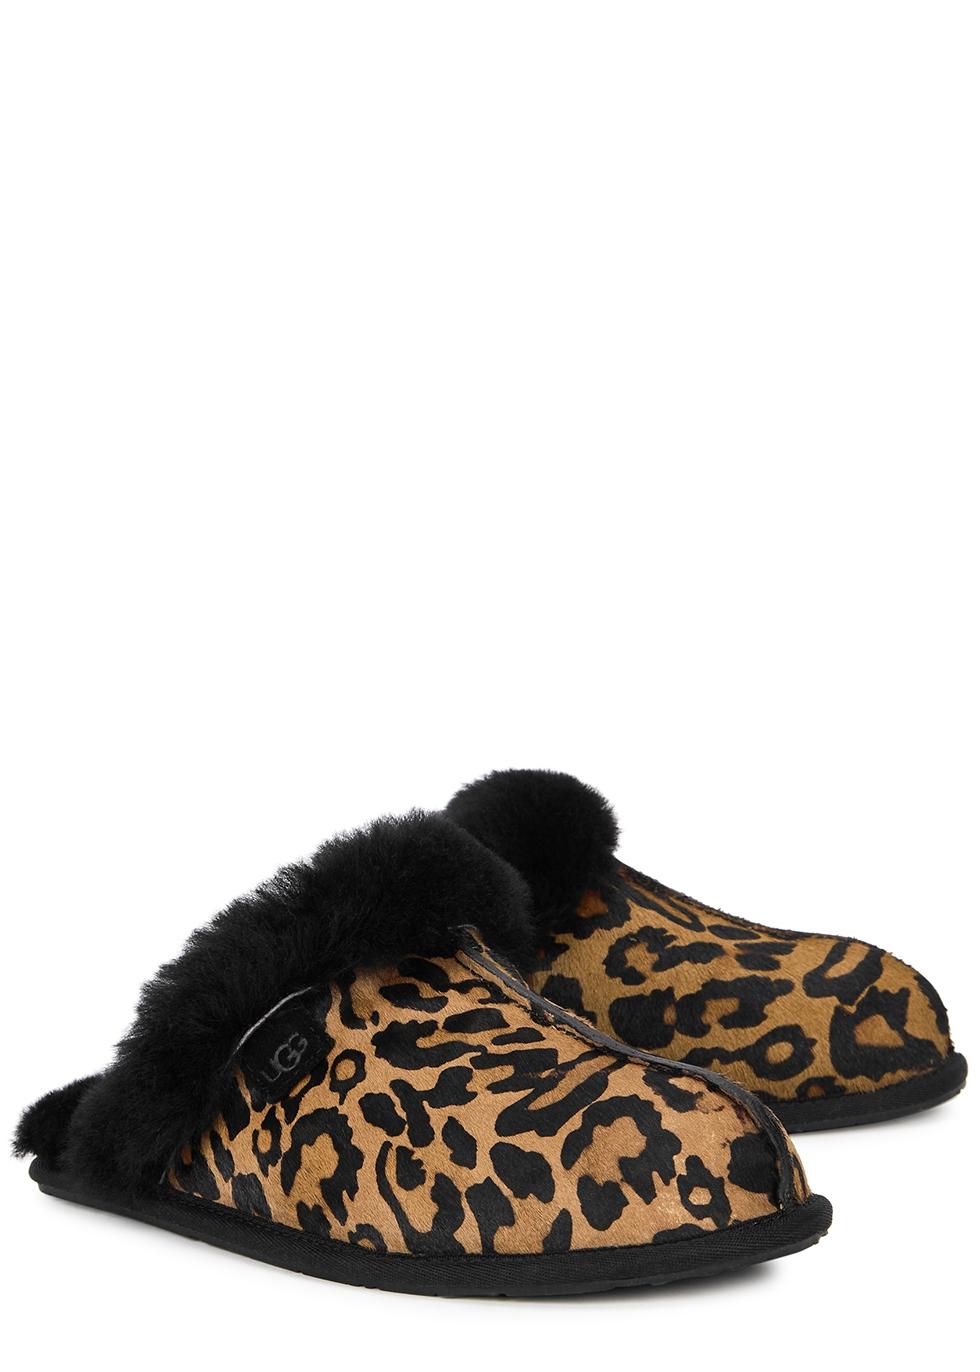 UGG Scuffette Ii Panther-print Calf Hair Slippers in Black | Lyst